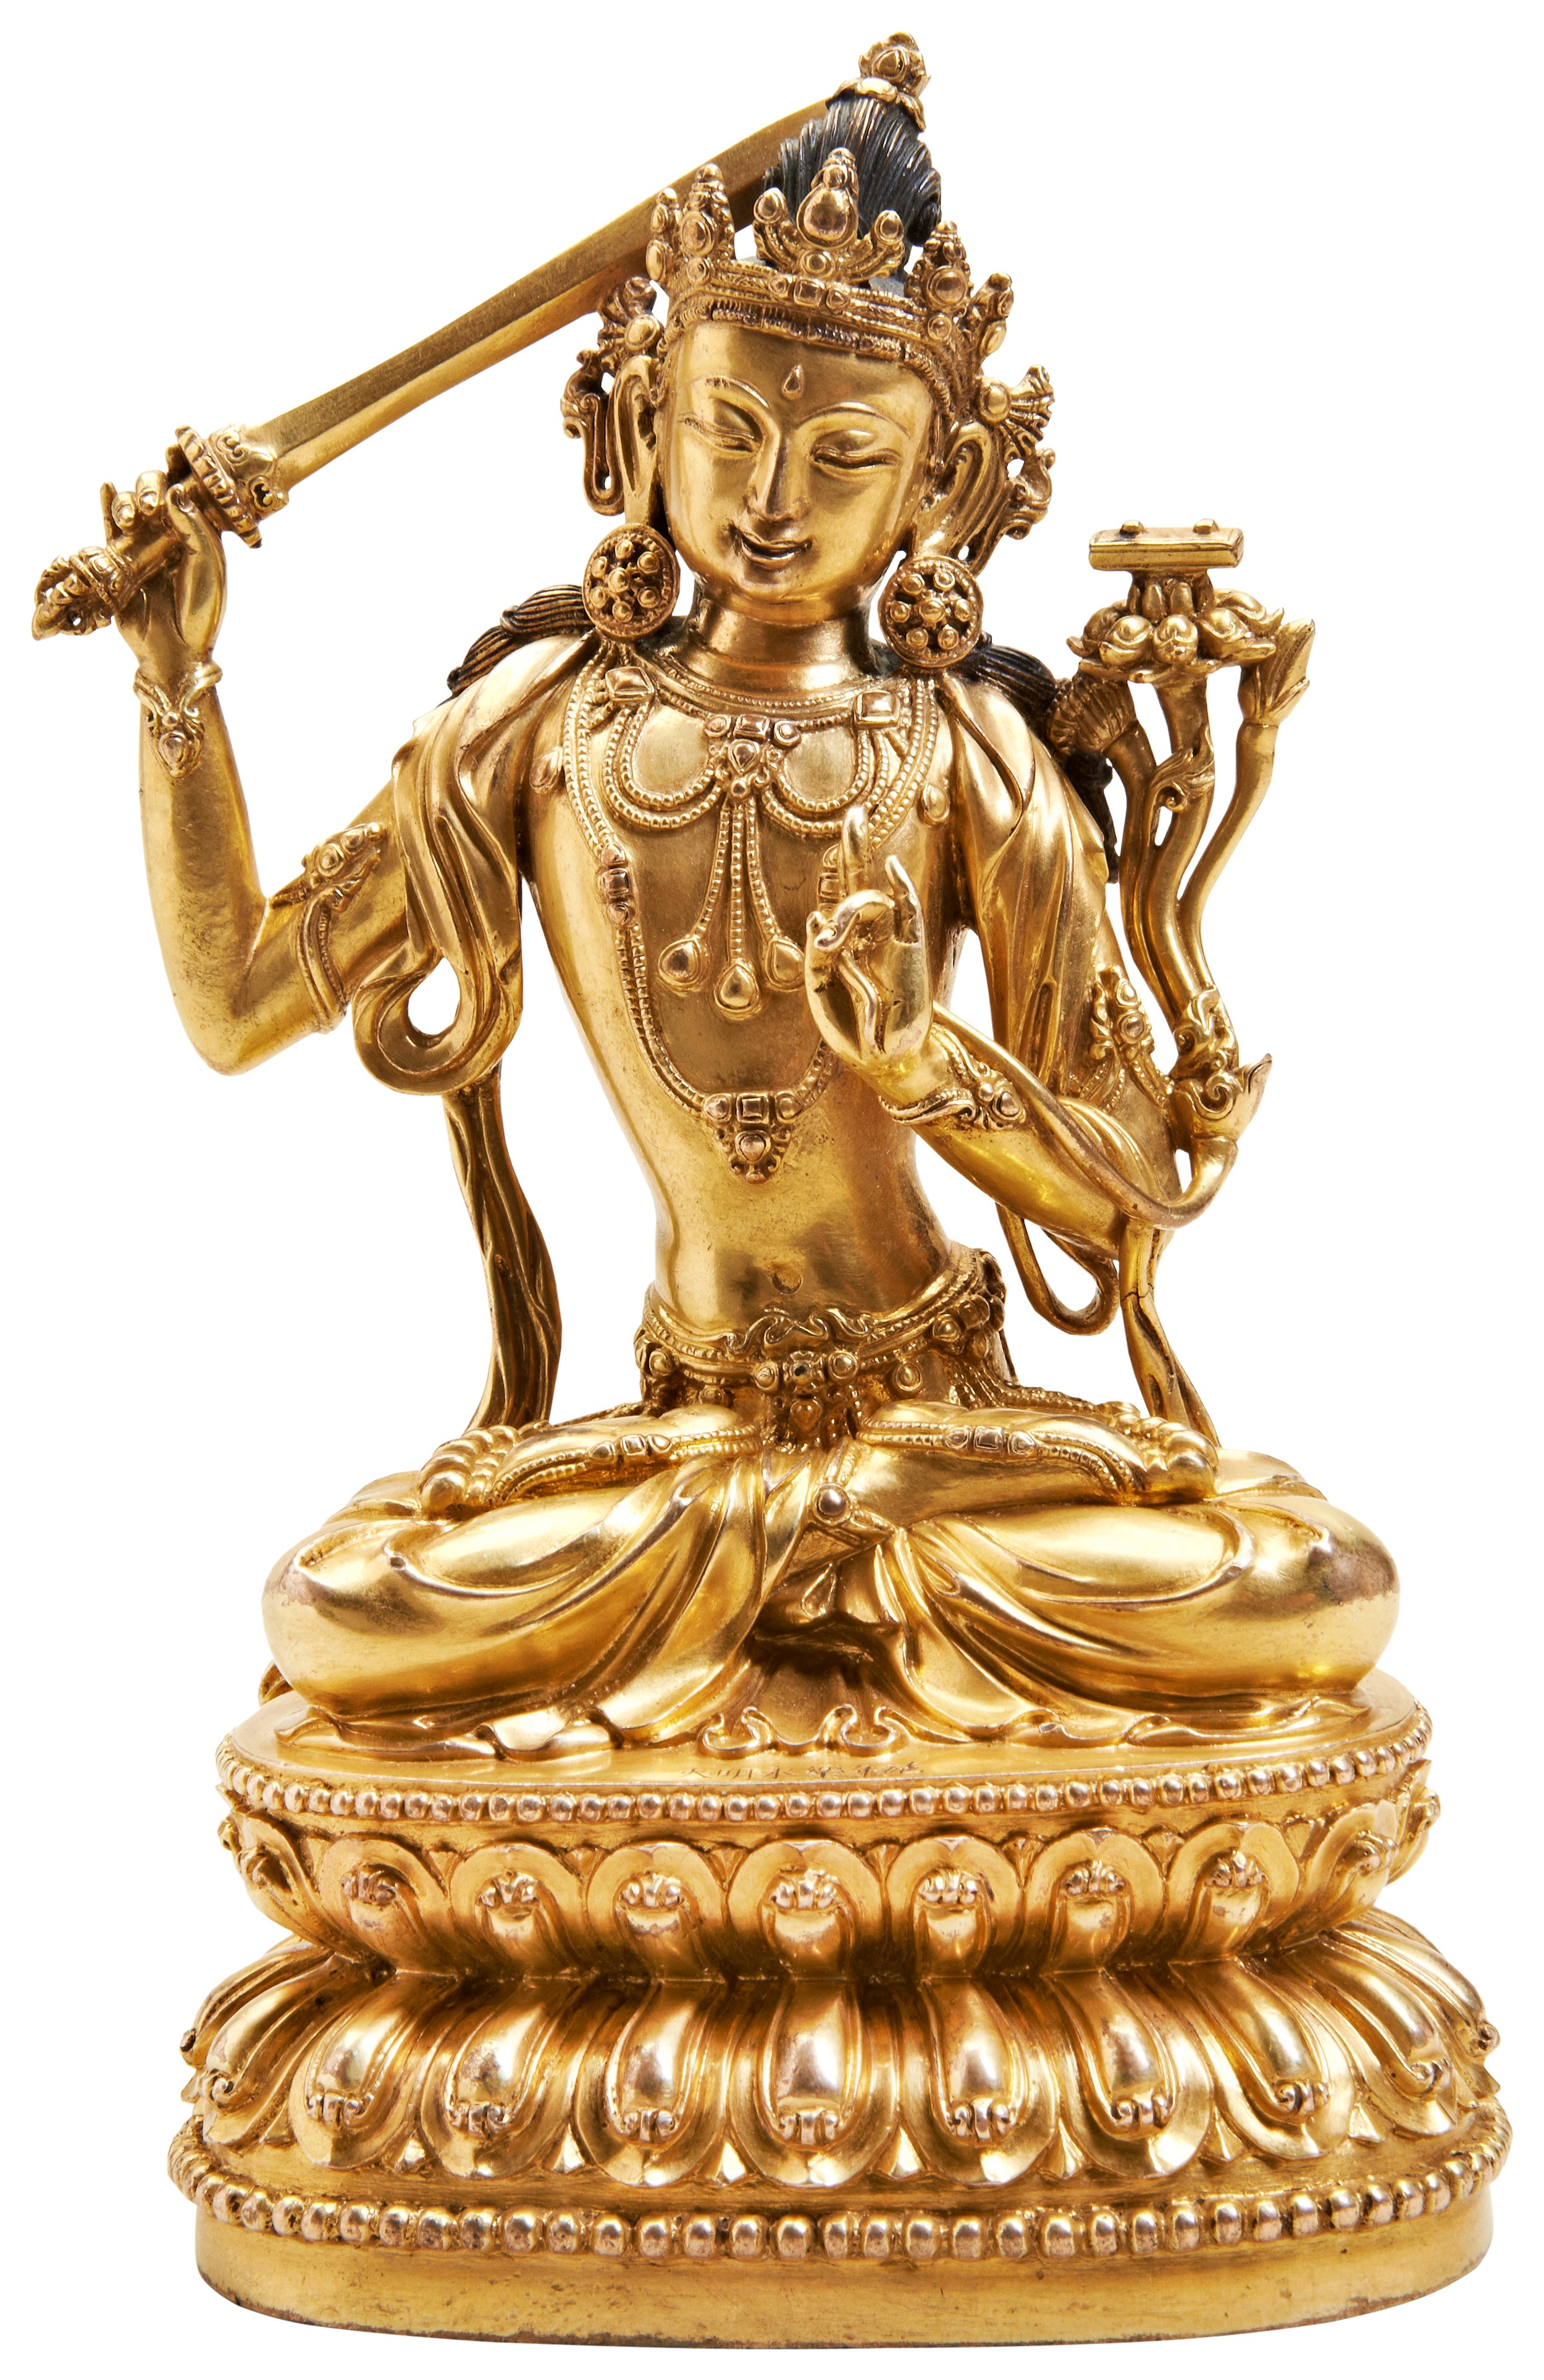 A FINE GILT BRONZE FIGURE OF MANJUSHRI YONGLE SIX CHARACTER MARK AND PROBABLY OF THE PERIOD  明